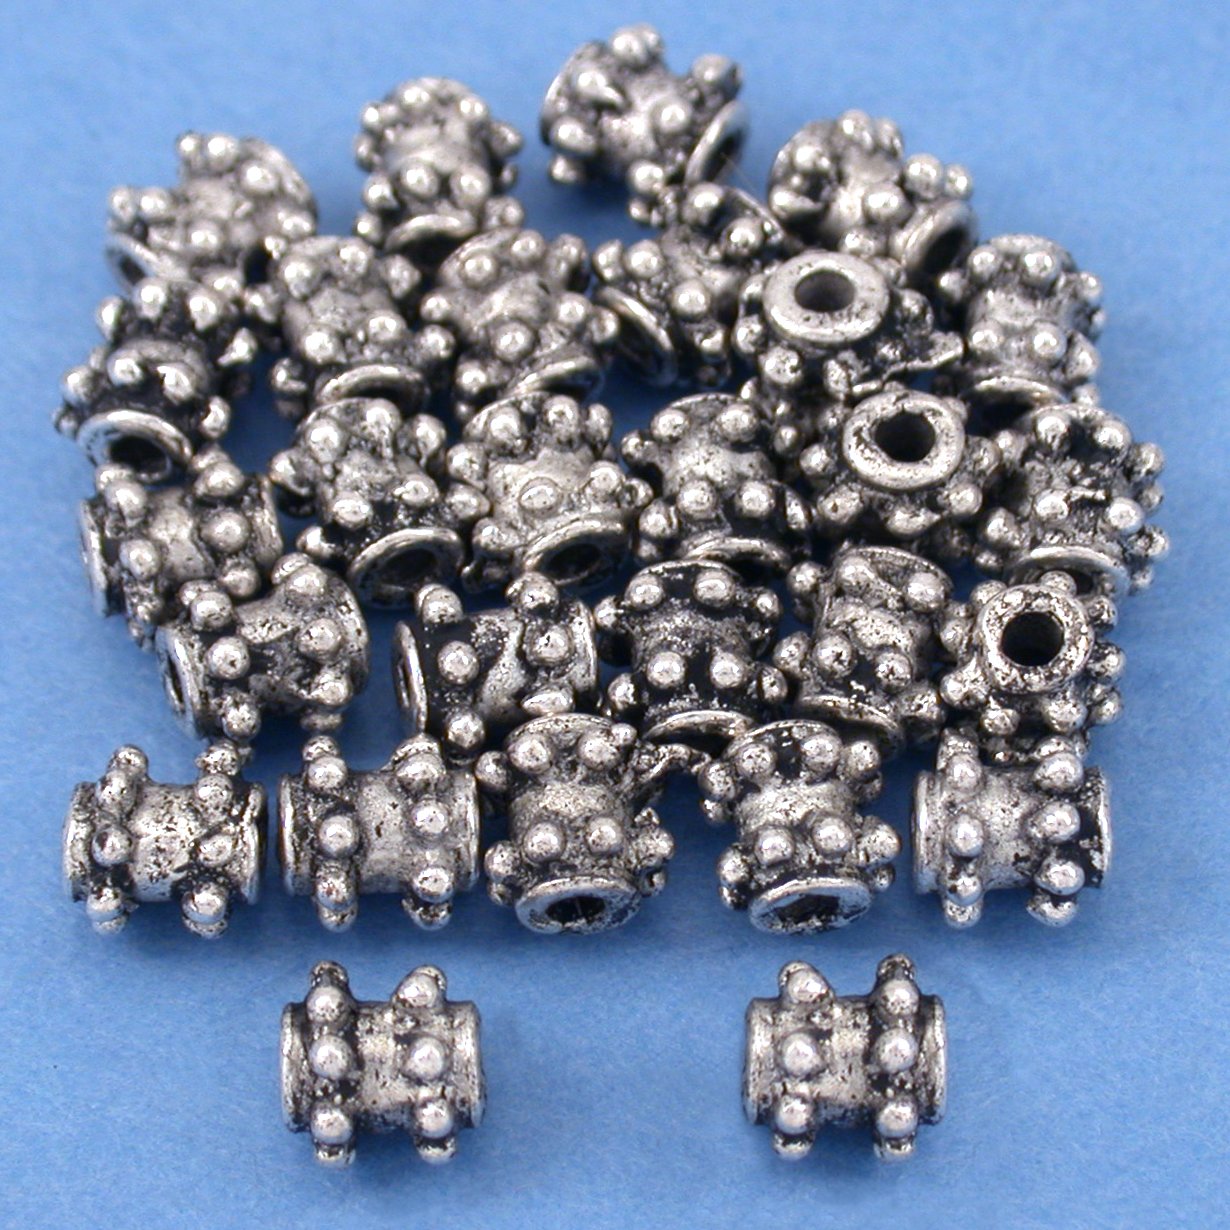 Bali Tube Antique Silver Plated Beads 6mm 15 Grams 25Pcs Approx.